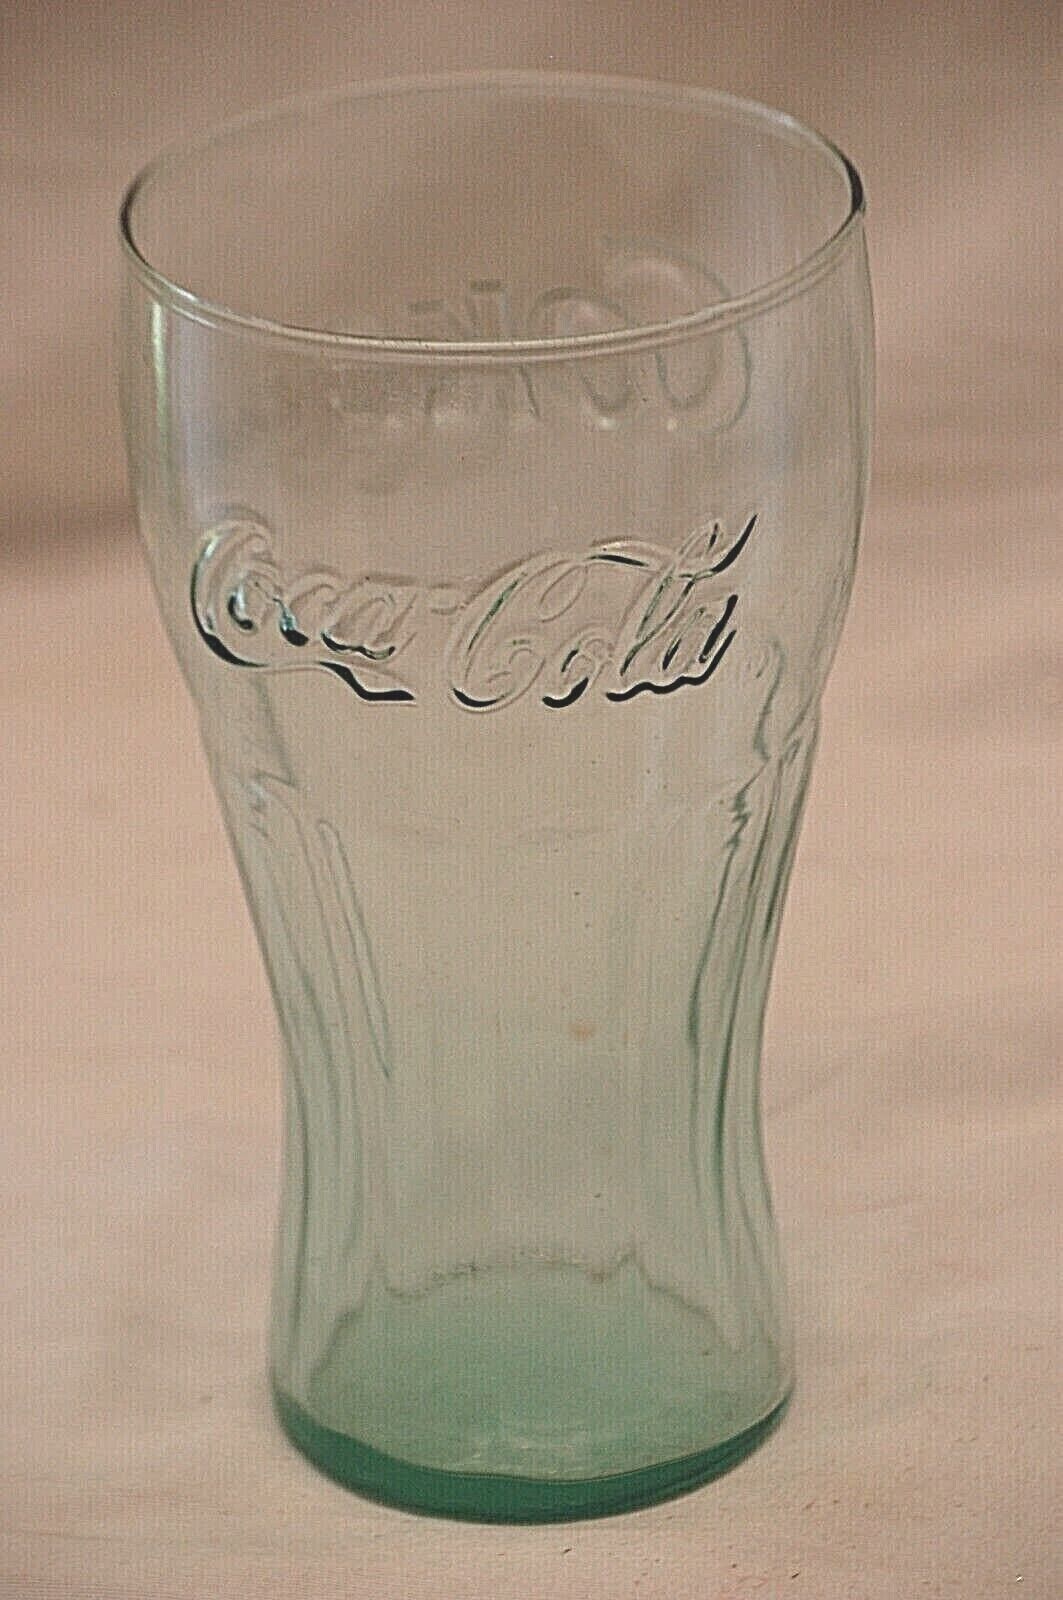 Primary image for Coca Cola Coke Large Drinking Glass Tumbler Libbey Glass Company